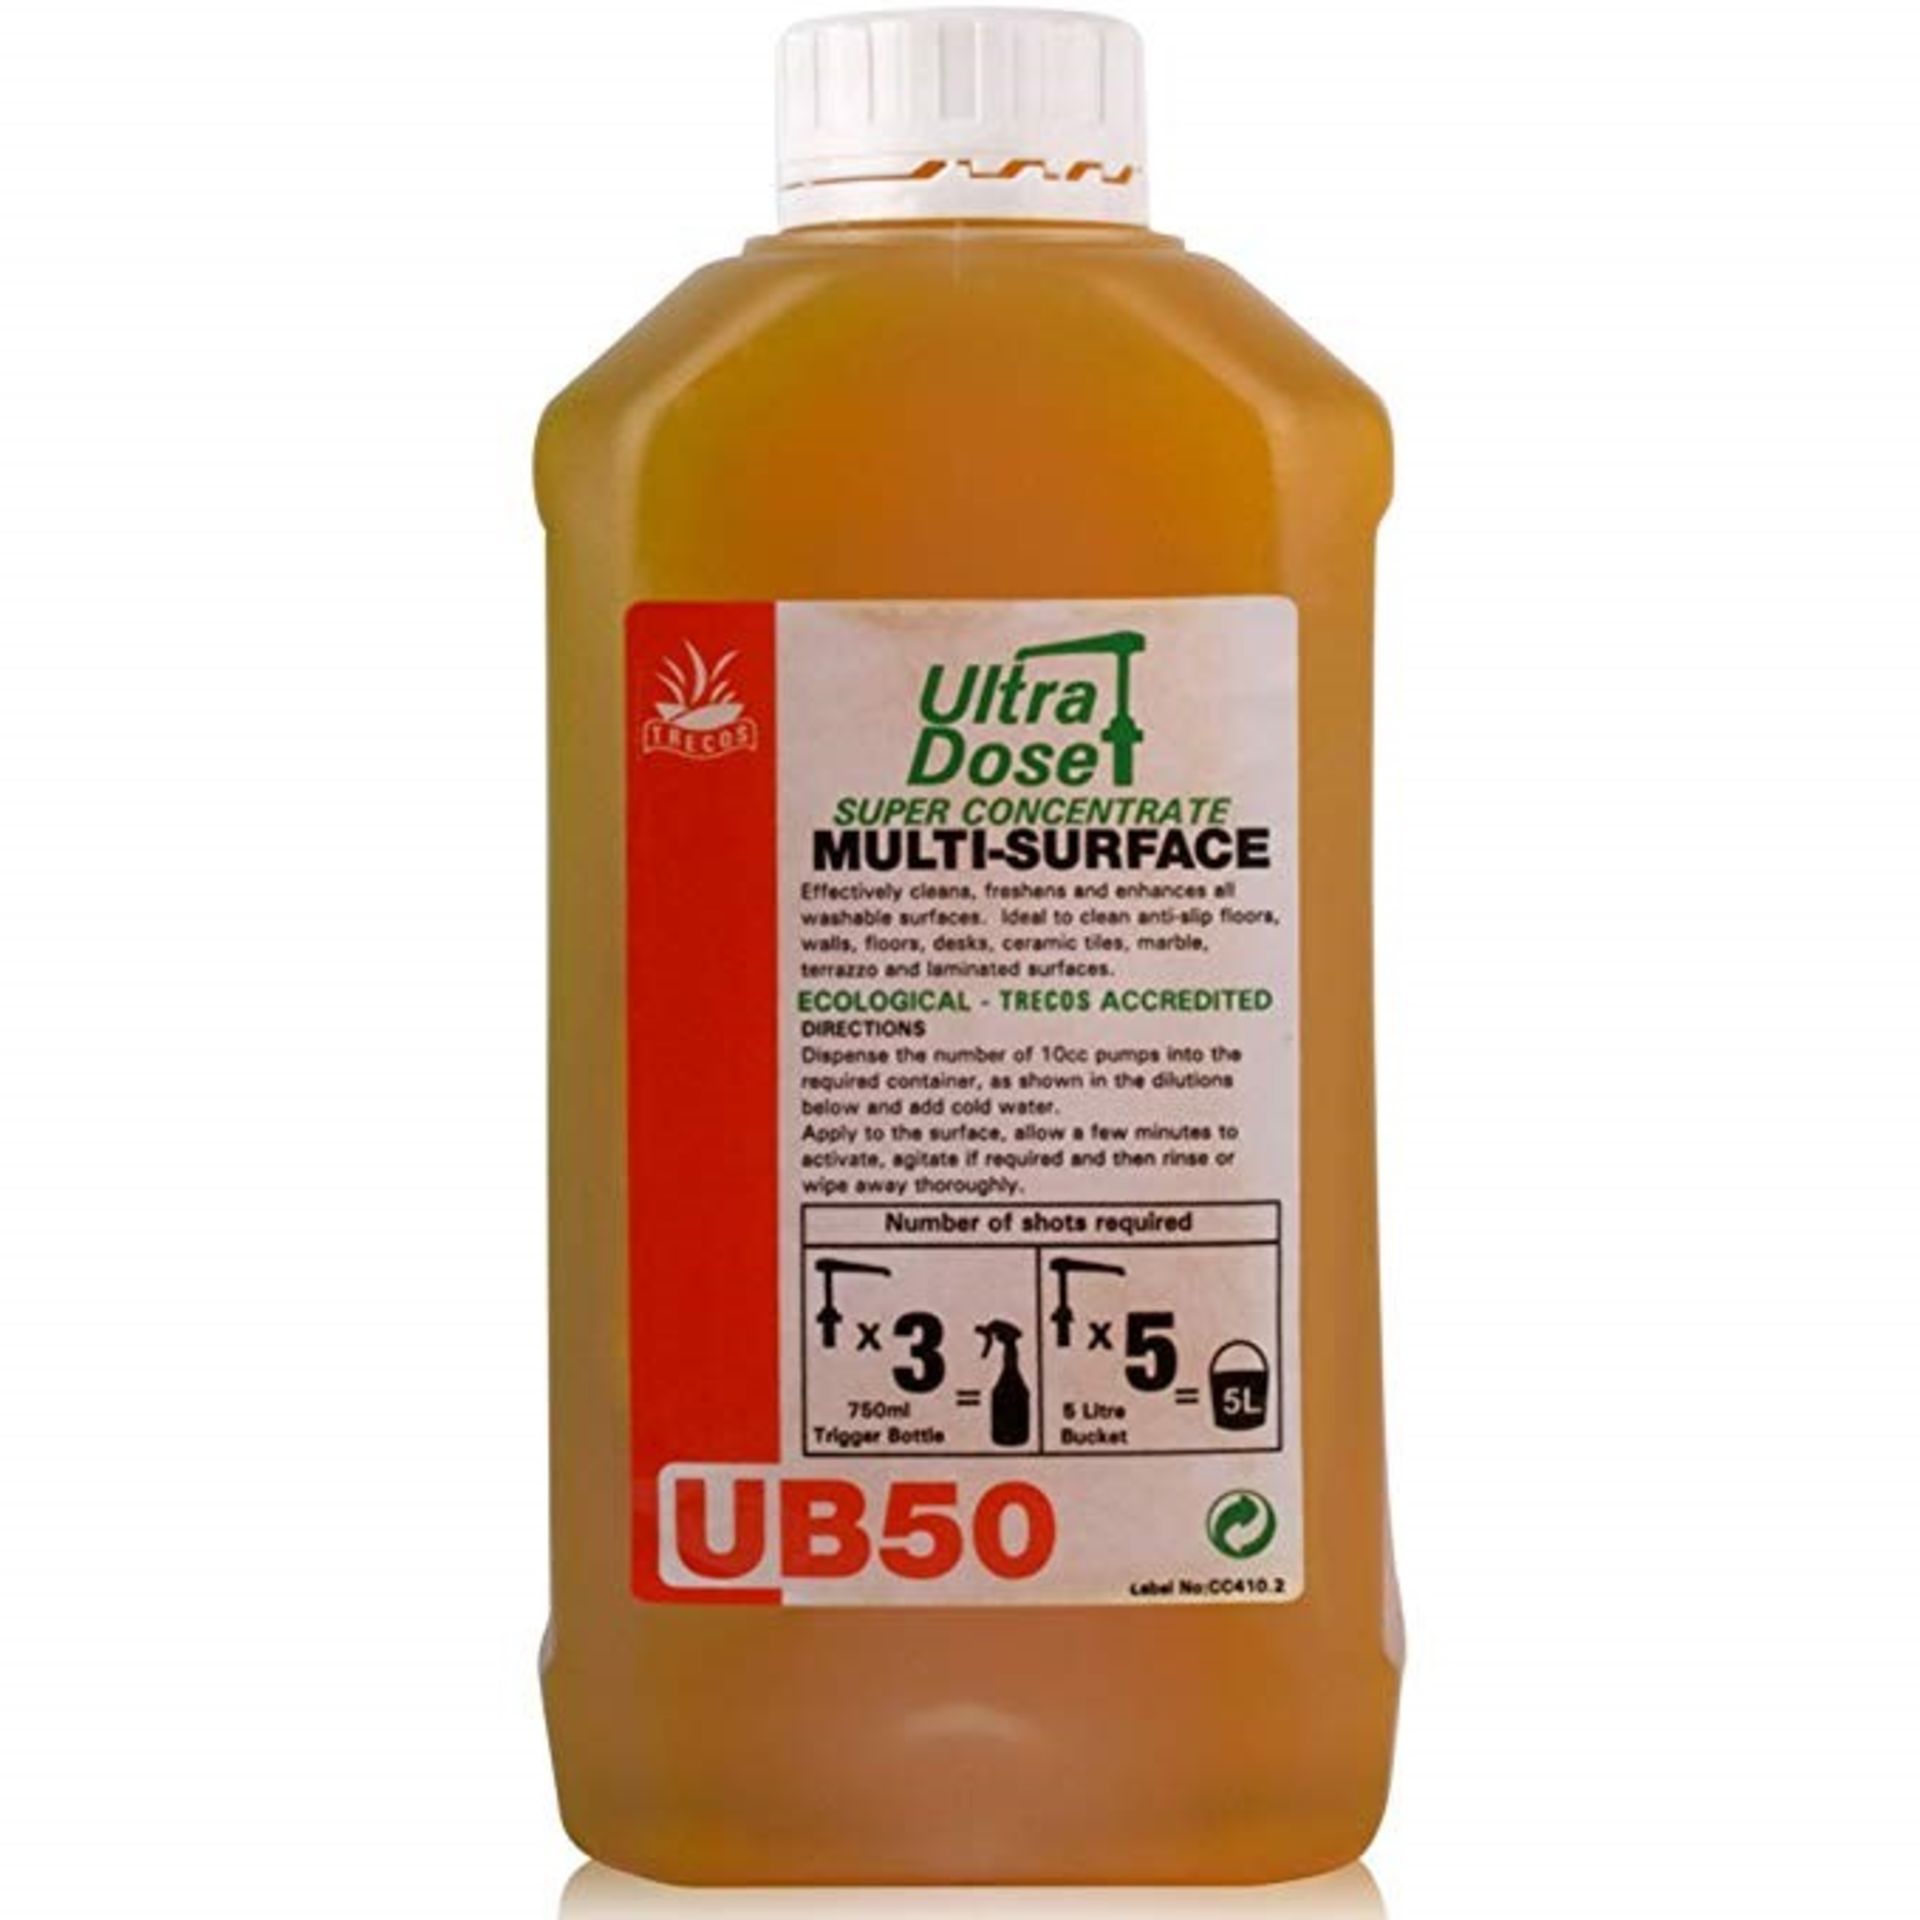 1 LOT TO CONTAIN 4 BOTTLES OF TRECOS UB50 SUPER CONCENTRATED MULTI-SURFACE CLEANER - EACH BOTTLE - Image 2 of 2